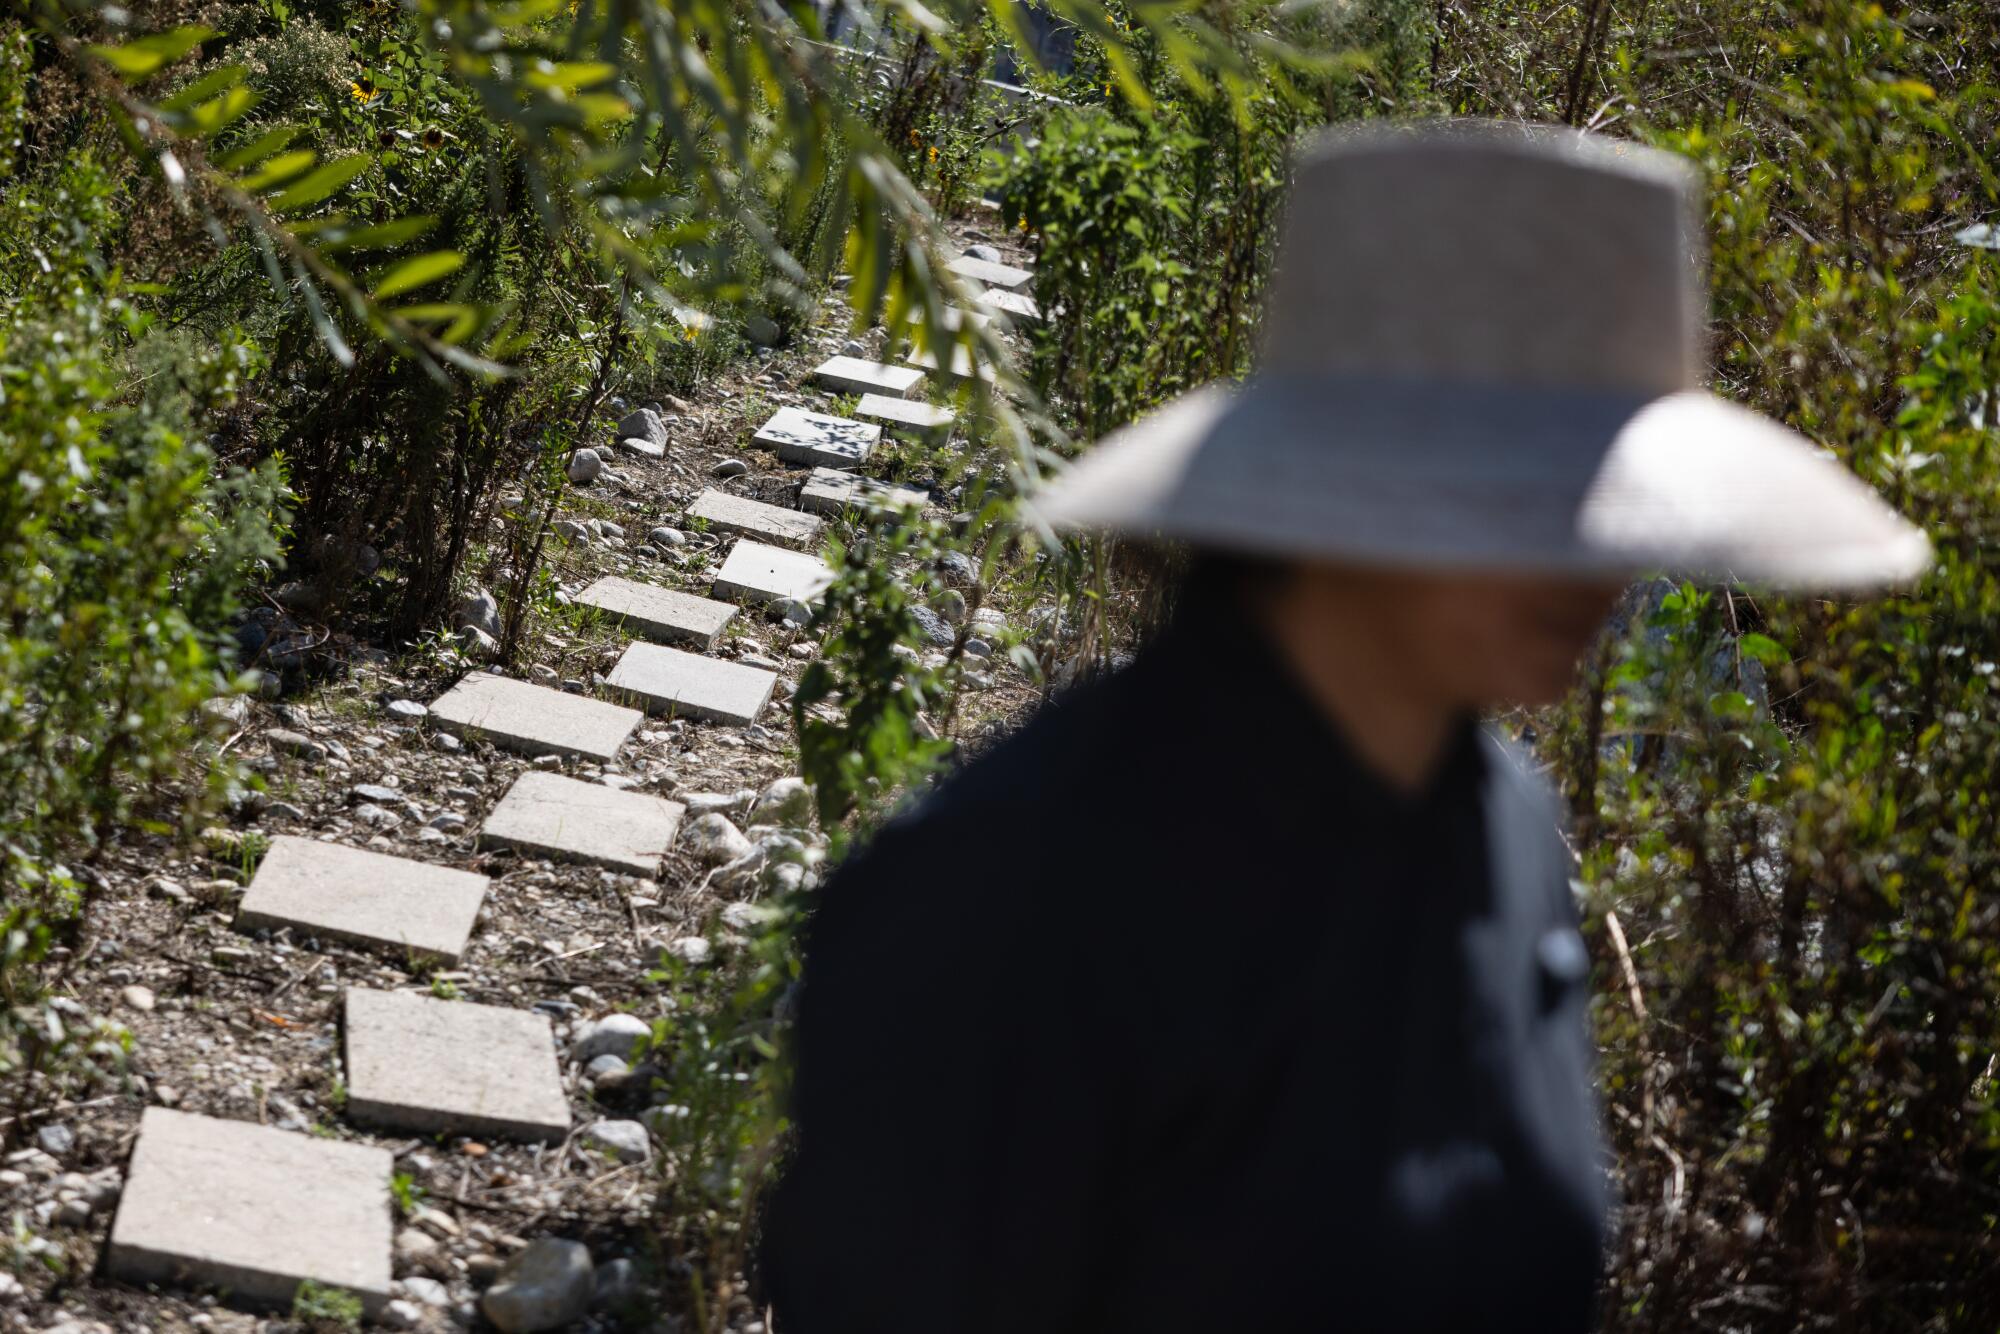 A person in a big gardener's hat walks before a pathway leading into a wooded garden